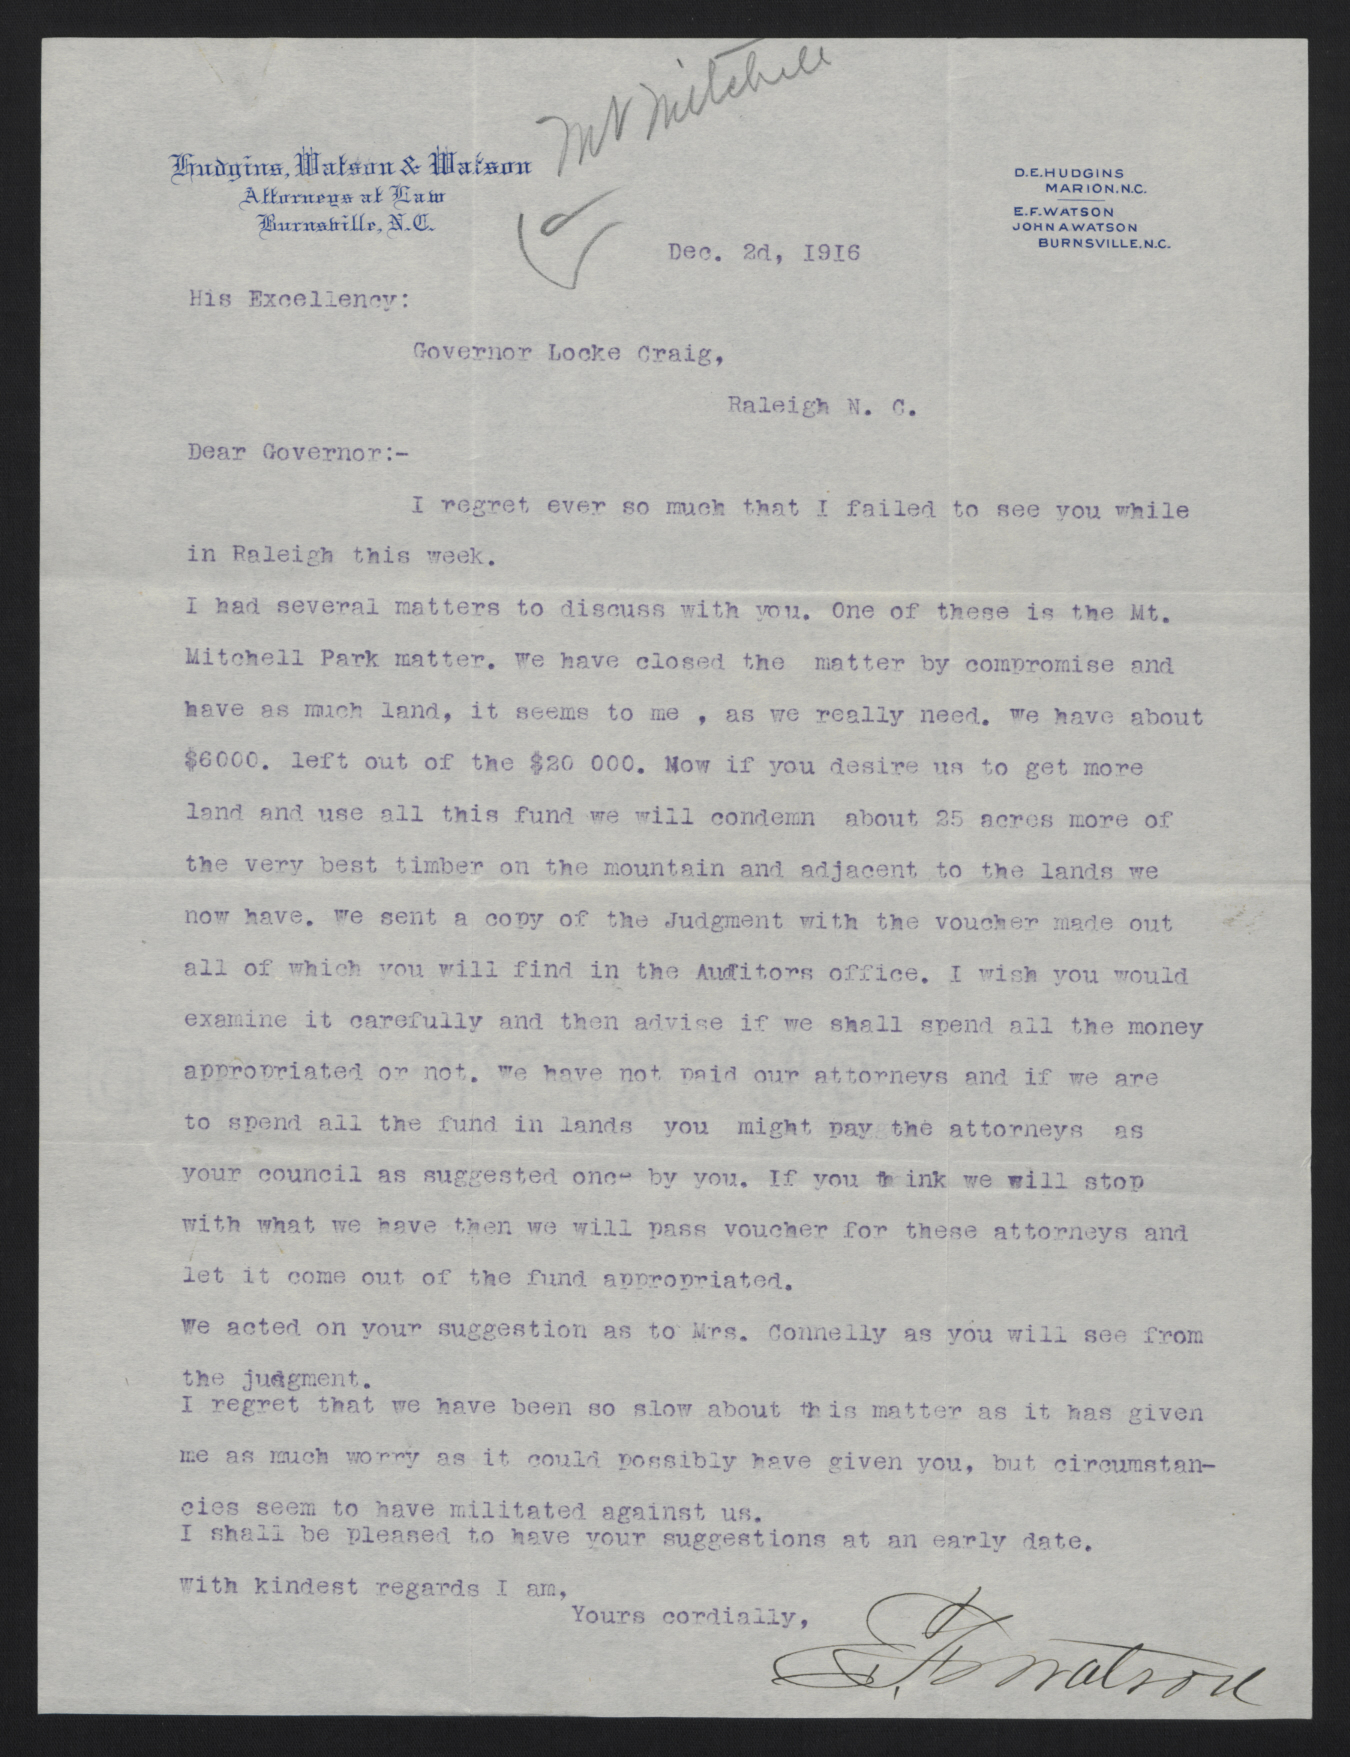 Letter from Watson to Craig, December 2, 1916